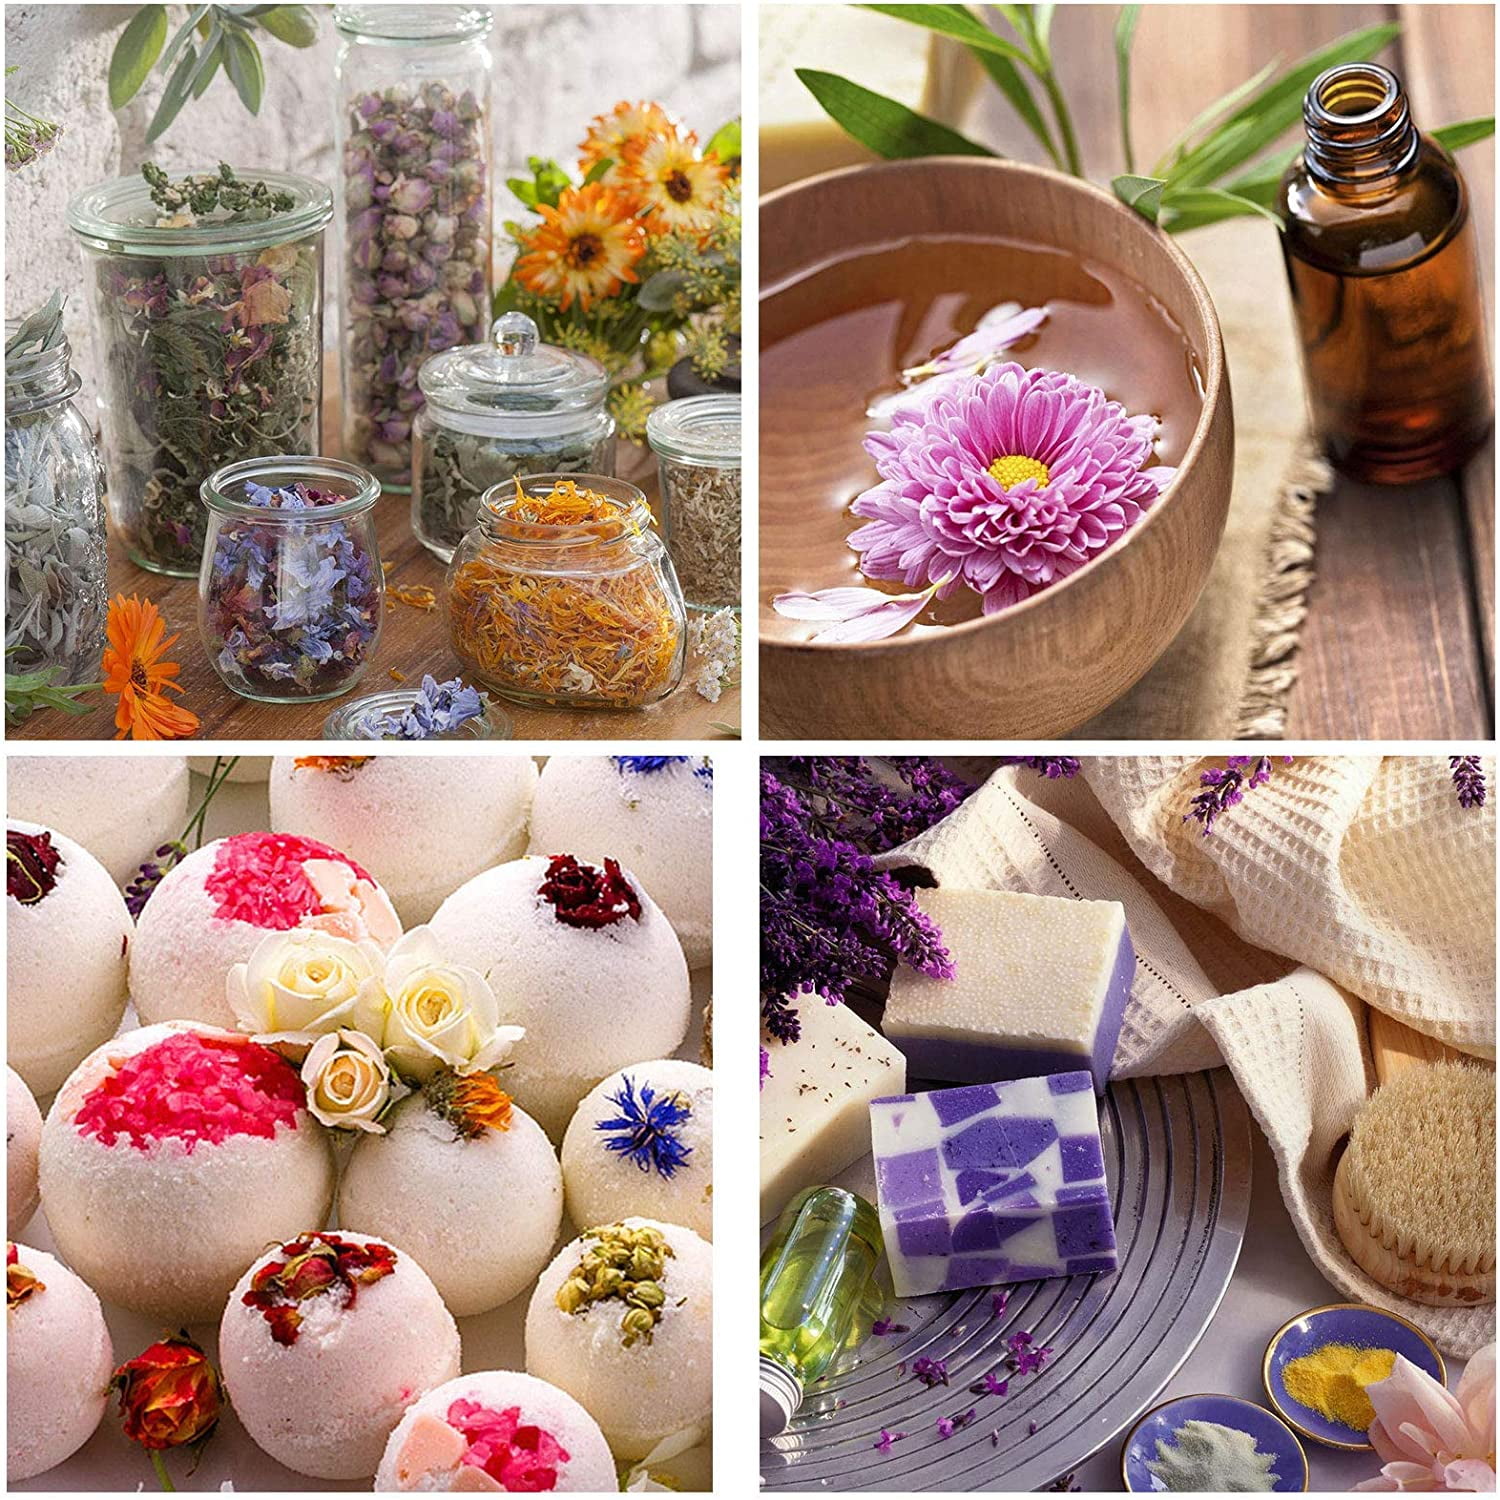 LAVEVE Dried Flowers, 40 Bags 100% Natural Dried Flowers Herbs Kit for Soap  Making, DIY Candle, Bath, Resin Jewelry Making - Include Lavender, Don't